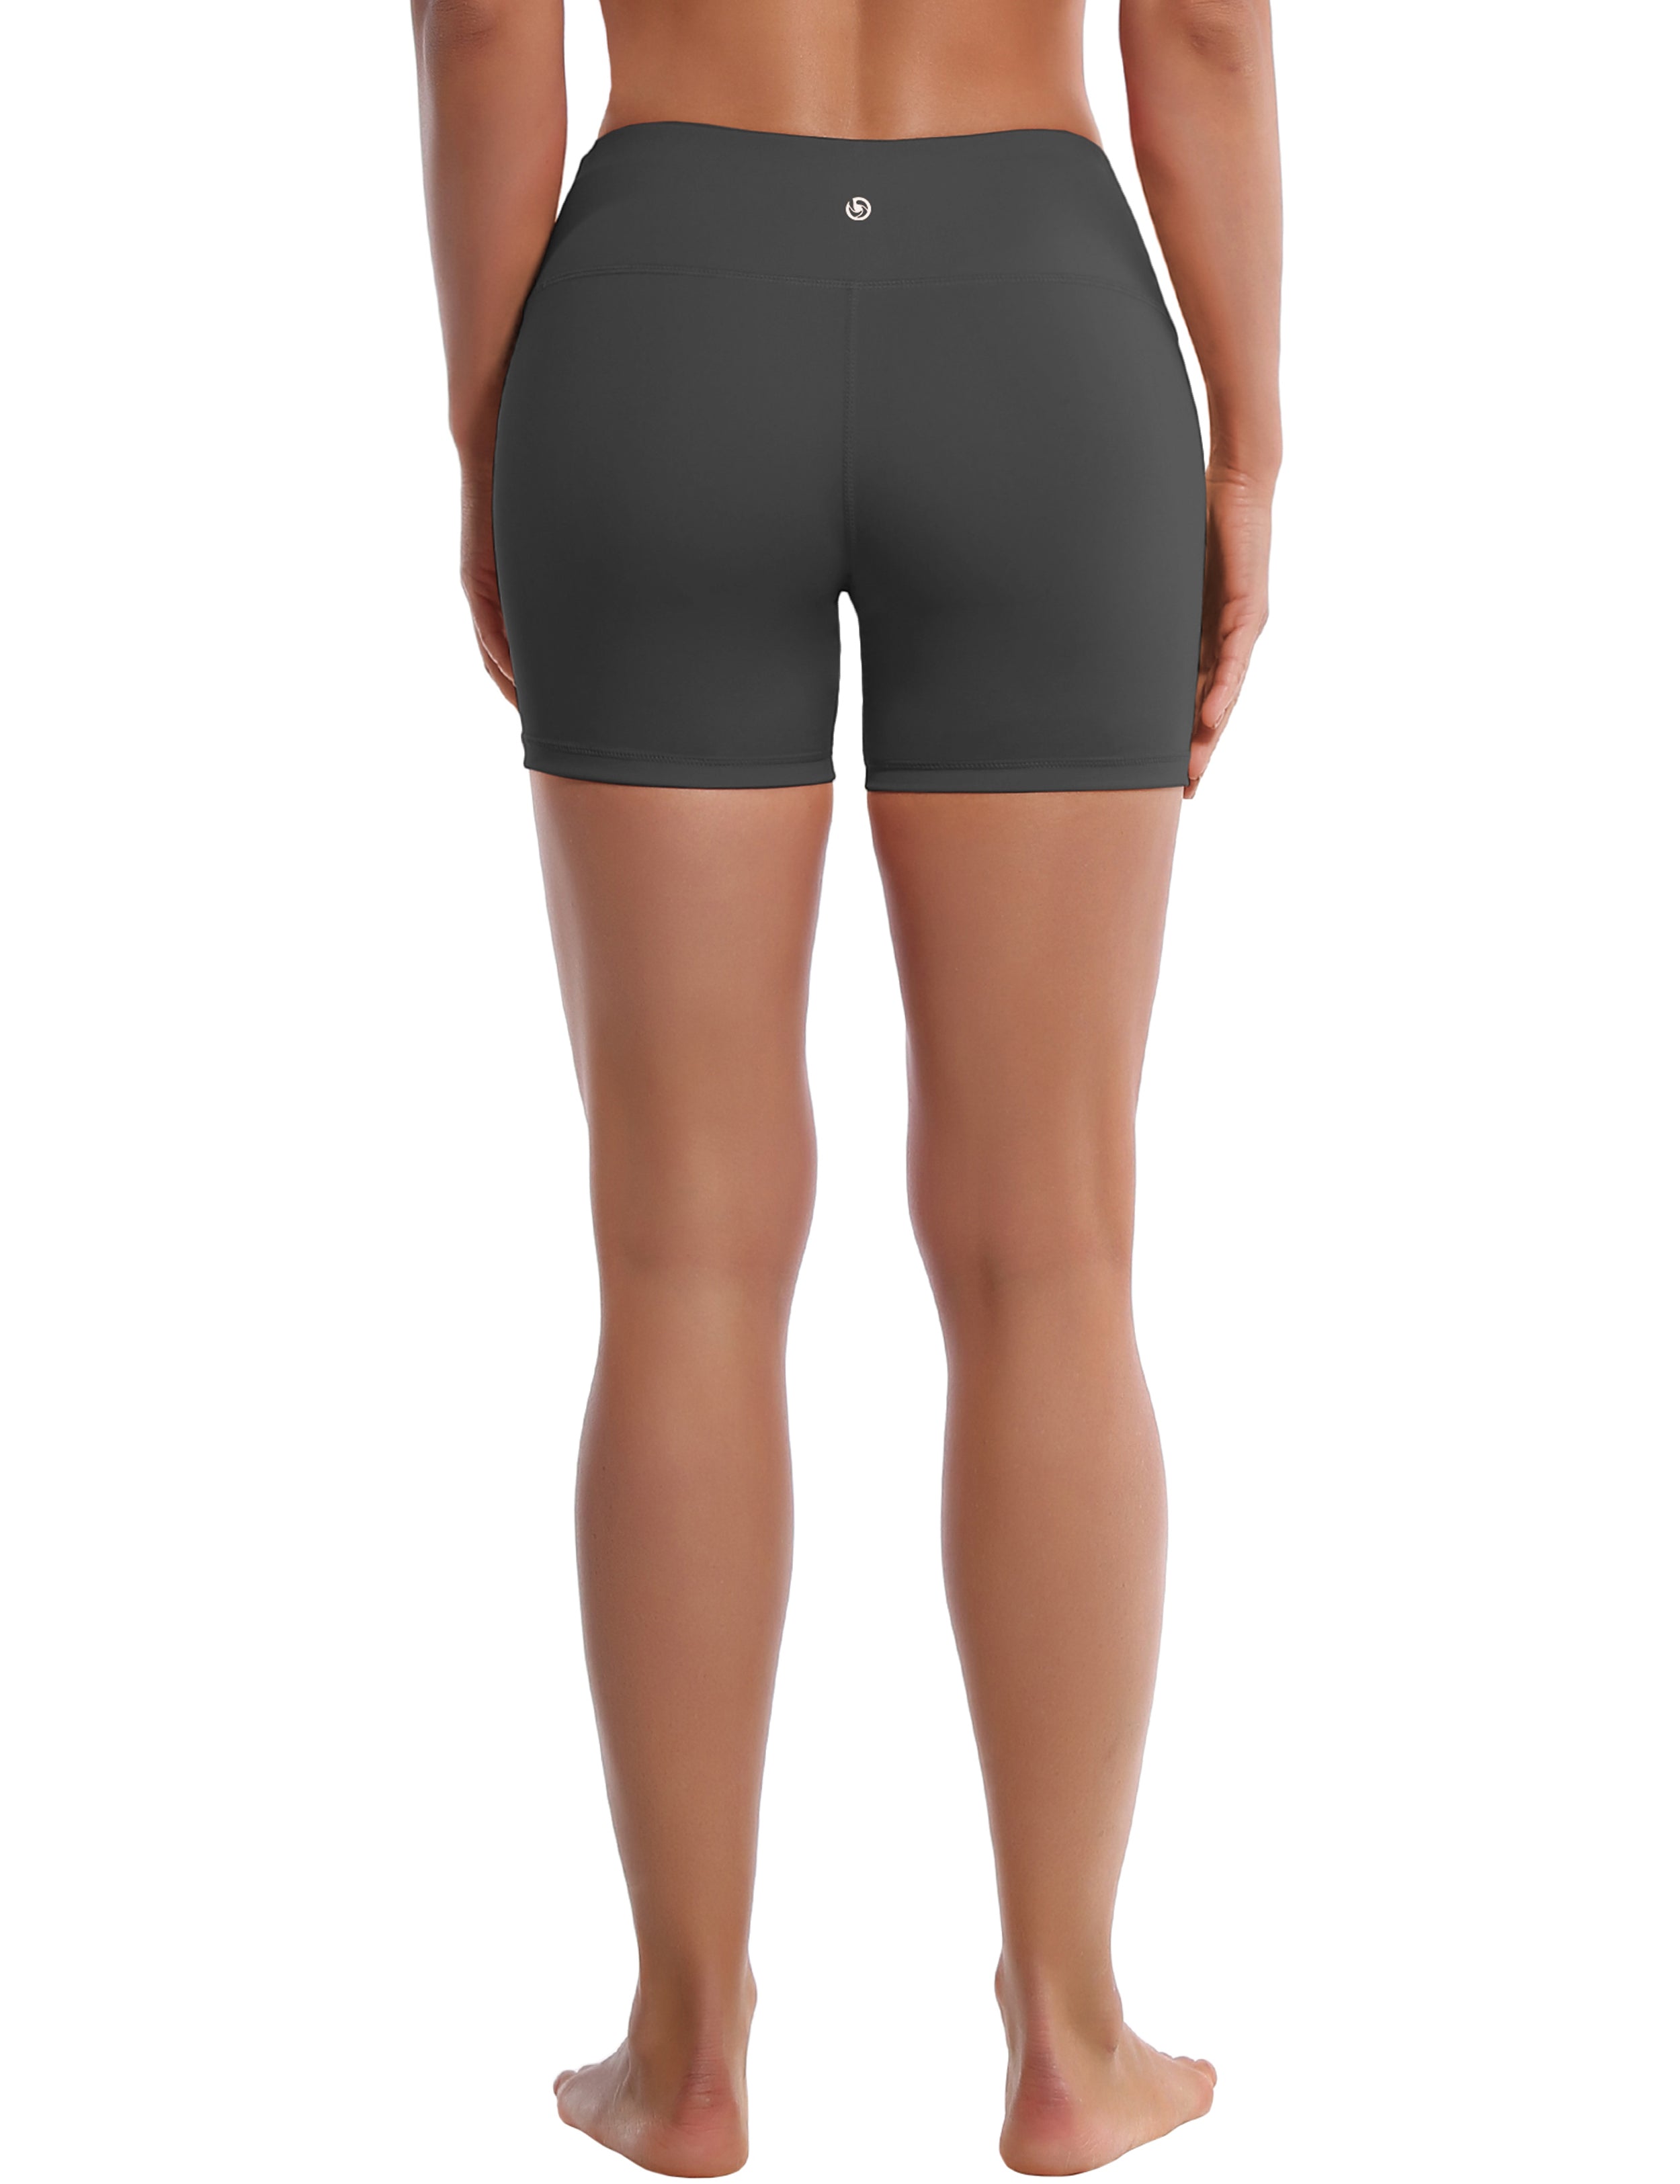 4" Tall Size Shorts shadowcharcoal Sleek, soft, smooth and totally comfortable: our newest style is here. Softest-ever fabric High elasticity High density 4-way stretch Fabric doesn't attract lint easily No see-through Moisture-wicking Machine wash 75% Nylon, 25% Spandex